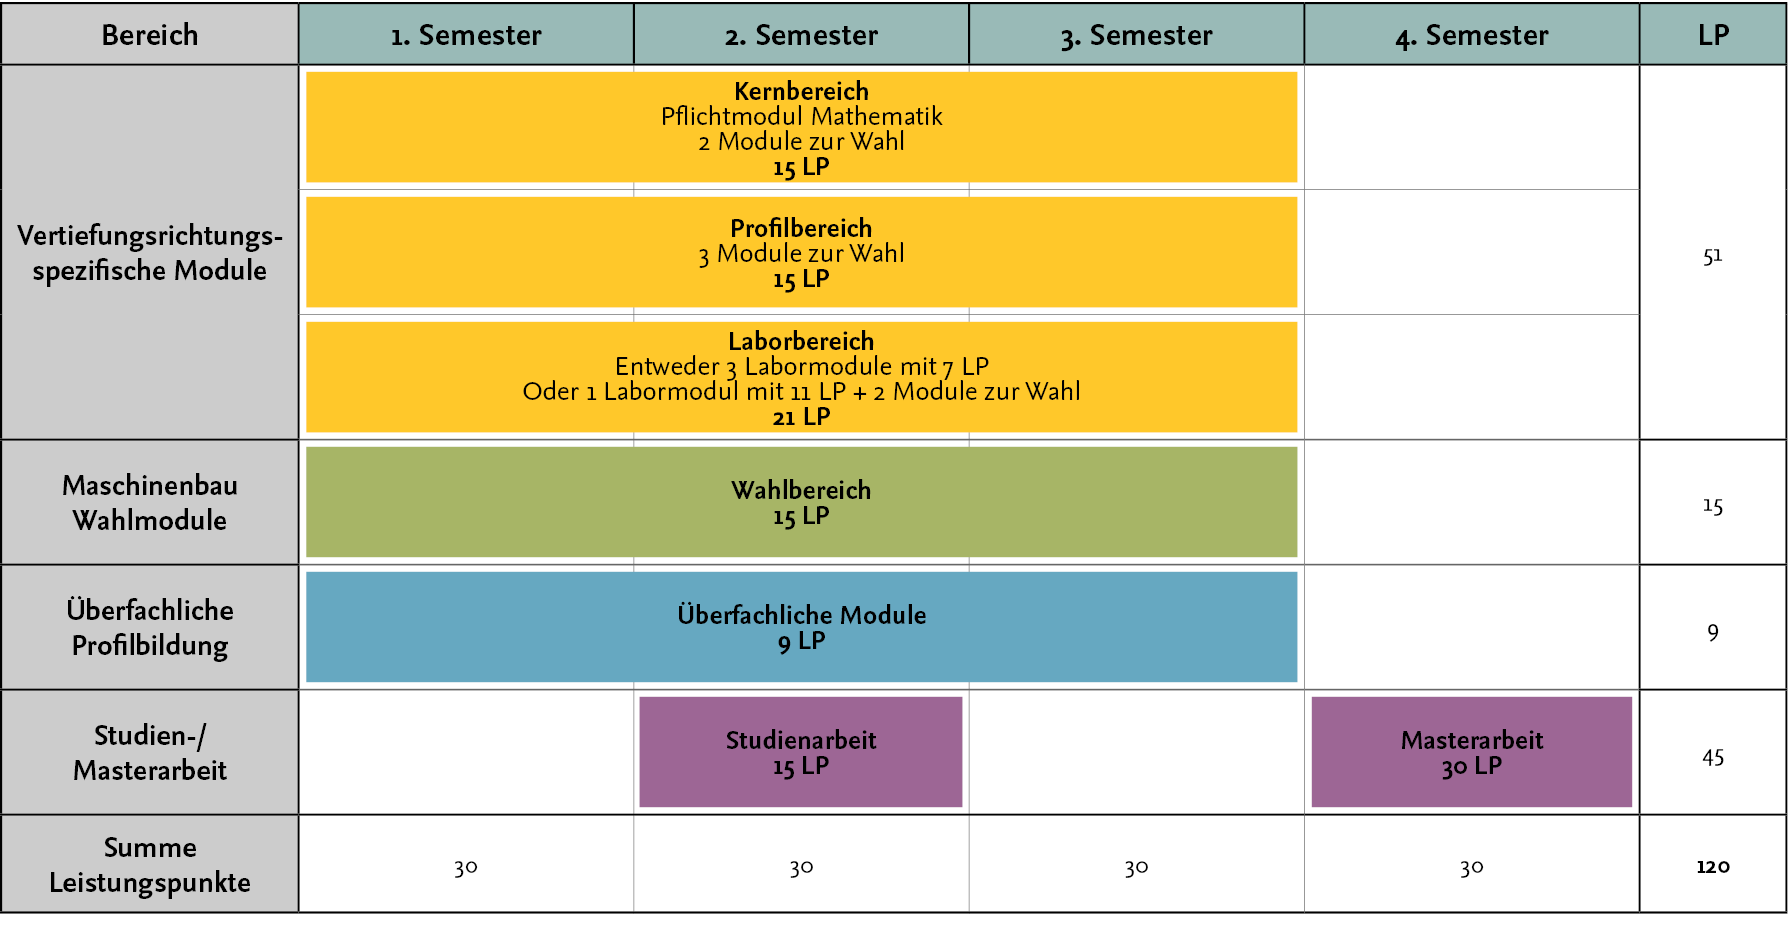 Structure of the Master's programmes Automotive Engineering, Mechanical Engineering and Aerospace Engineering